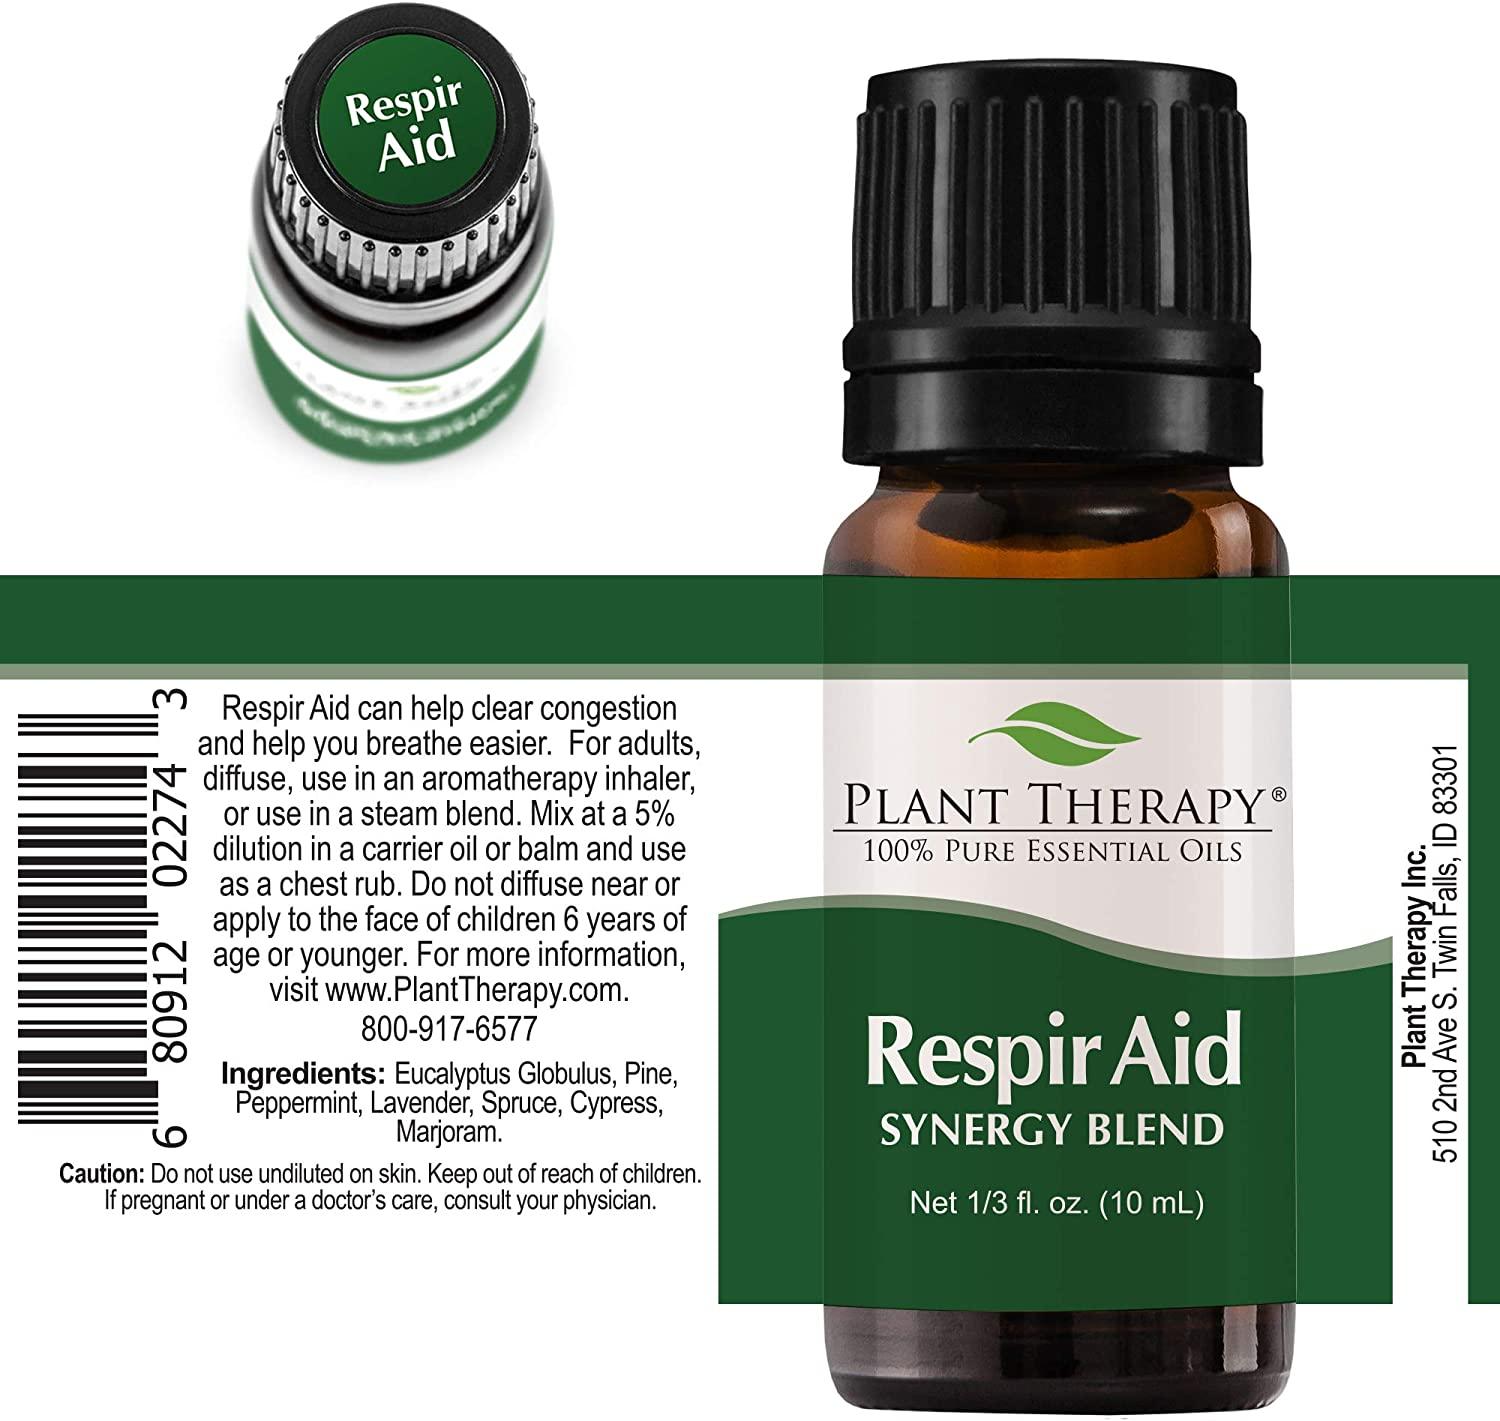 Plant Therapy Peppermint Essential Oil 100% Pure, Undiluted, Natural  Aromatherapy, Therapeutic Grade 10 mL (1/3 oz) 